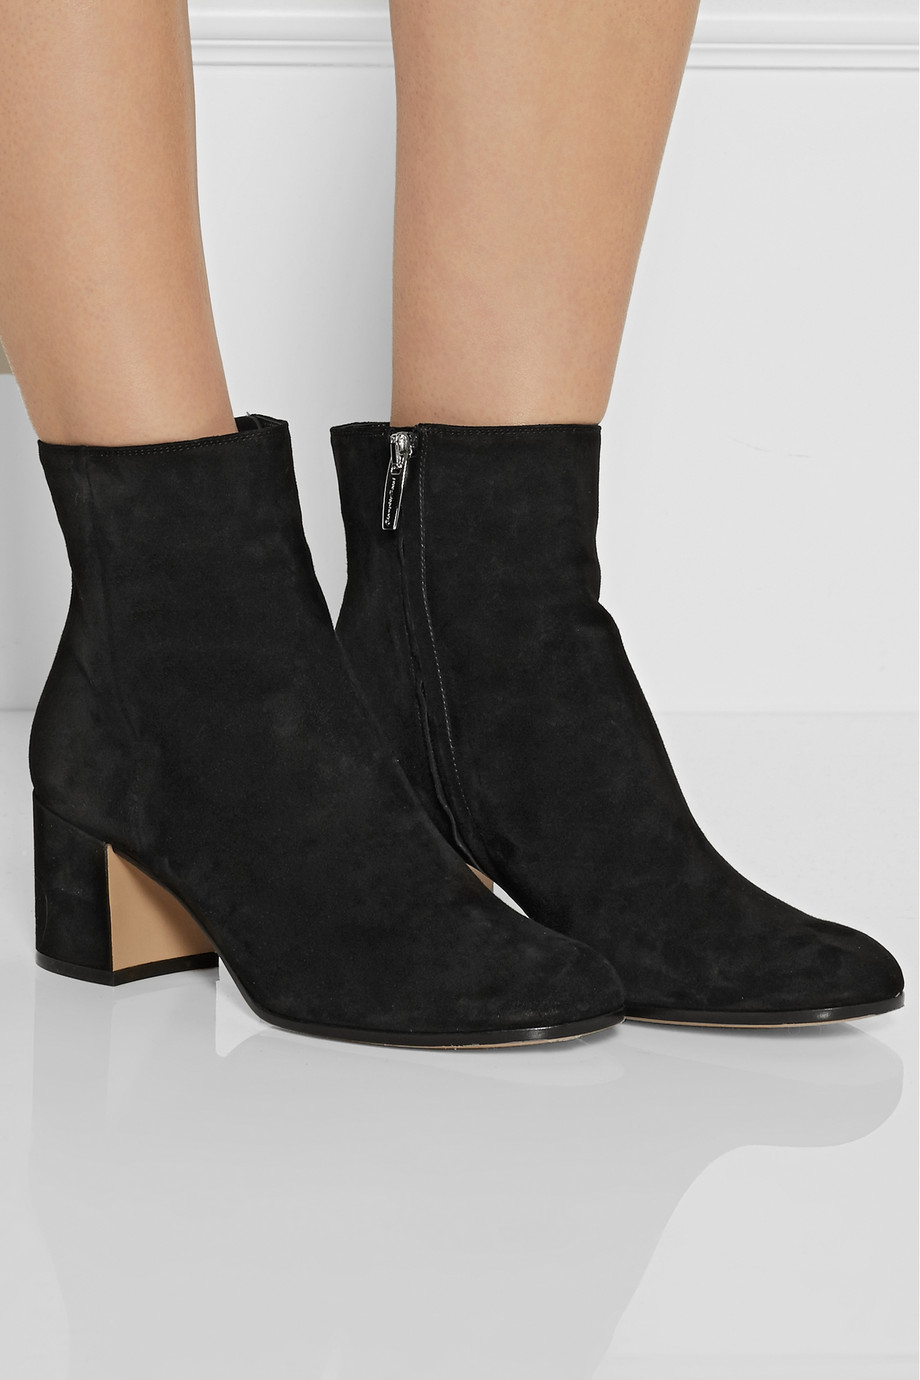 Gianvito rossi Suede Ankle Boots in Black | Lyst